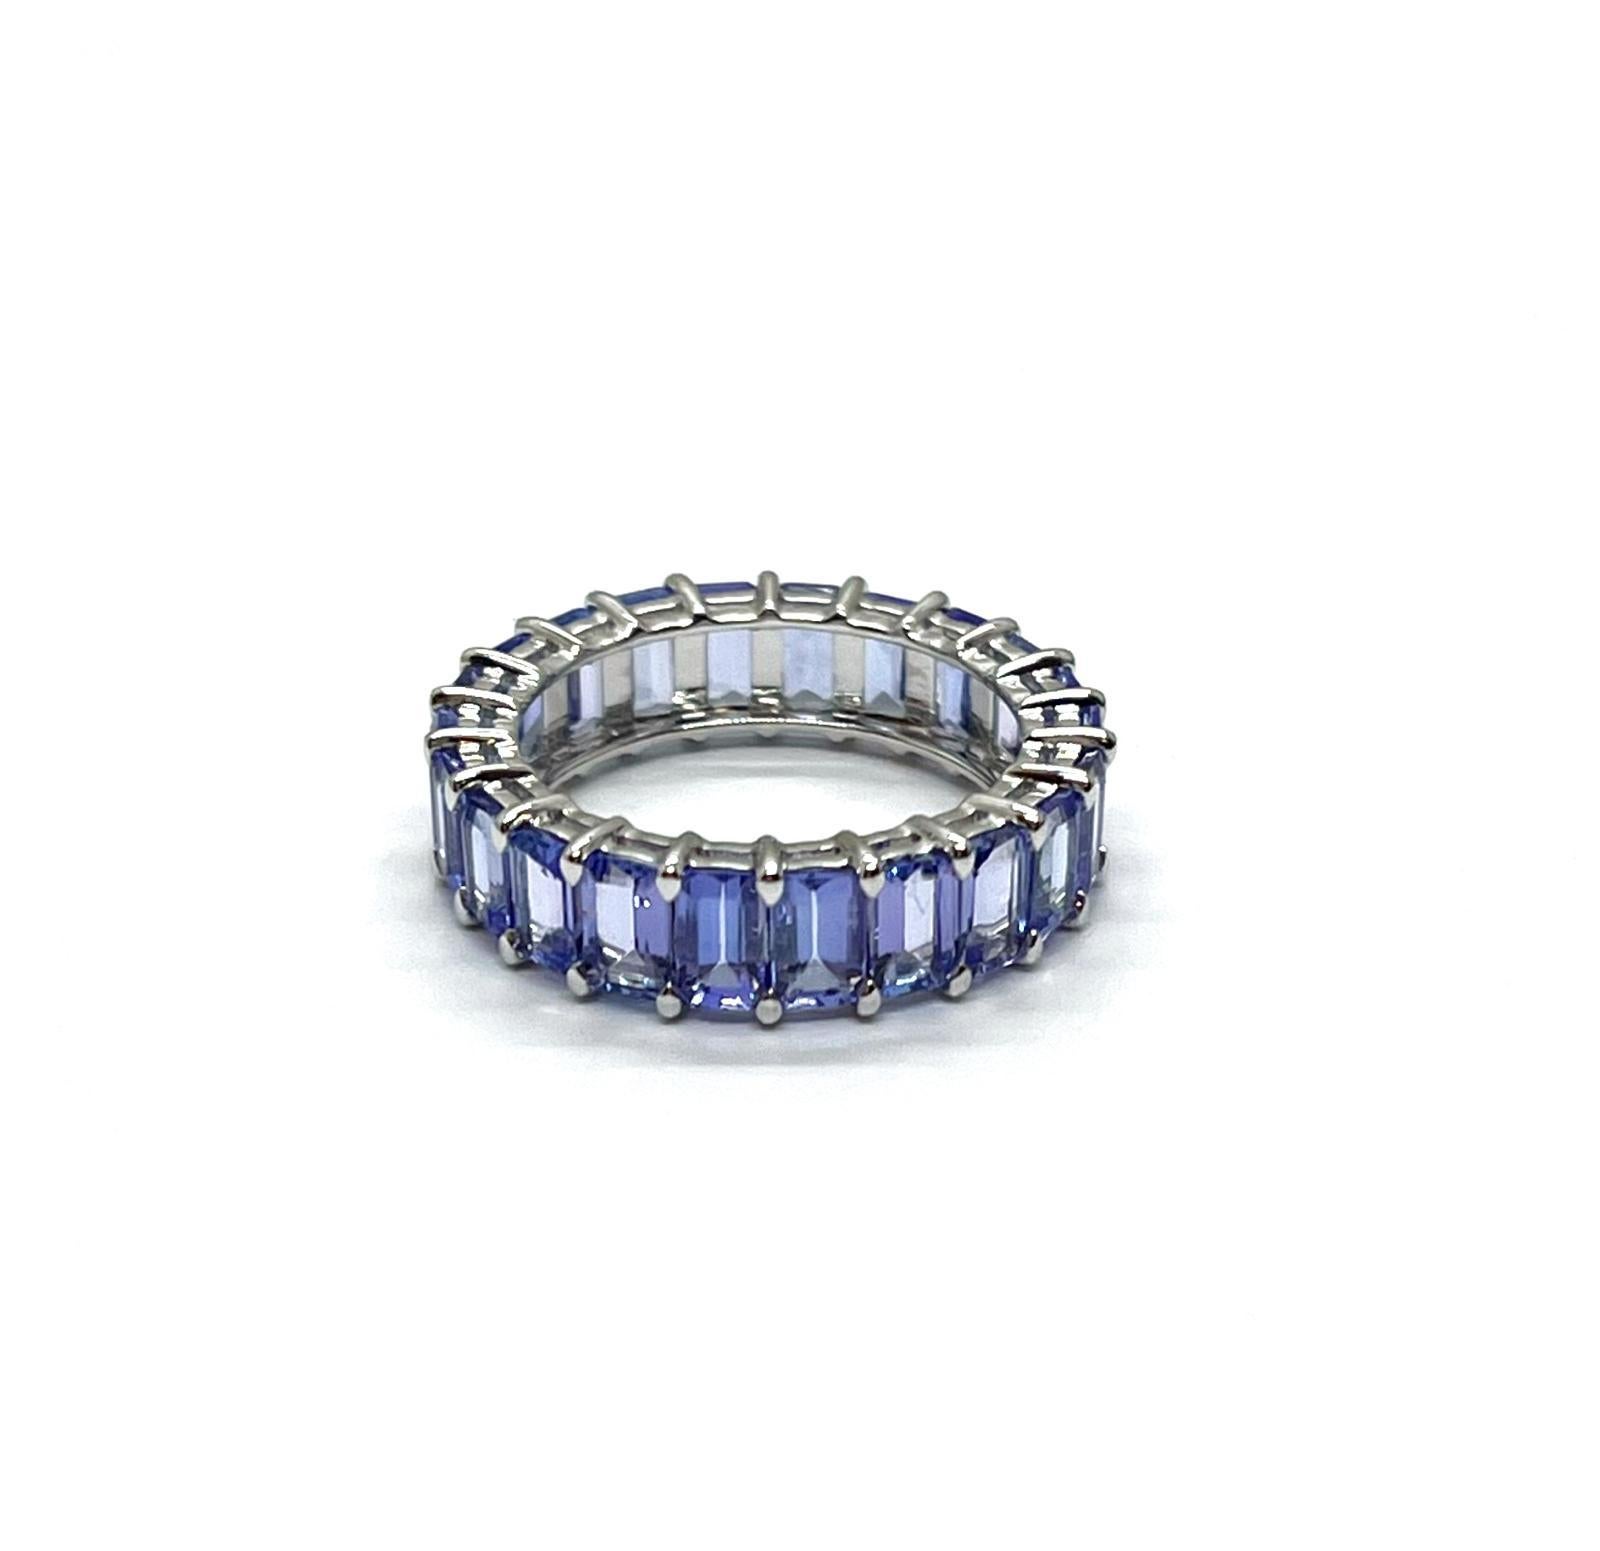 Andreoli Tanzanite 18 Karat White Gold Eternity Band

This ring features:
- 5.72 Carat Tanzanite
- 3.01 Gram 18K White Gold
- Made In Italy